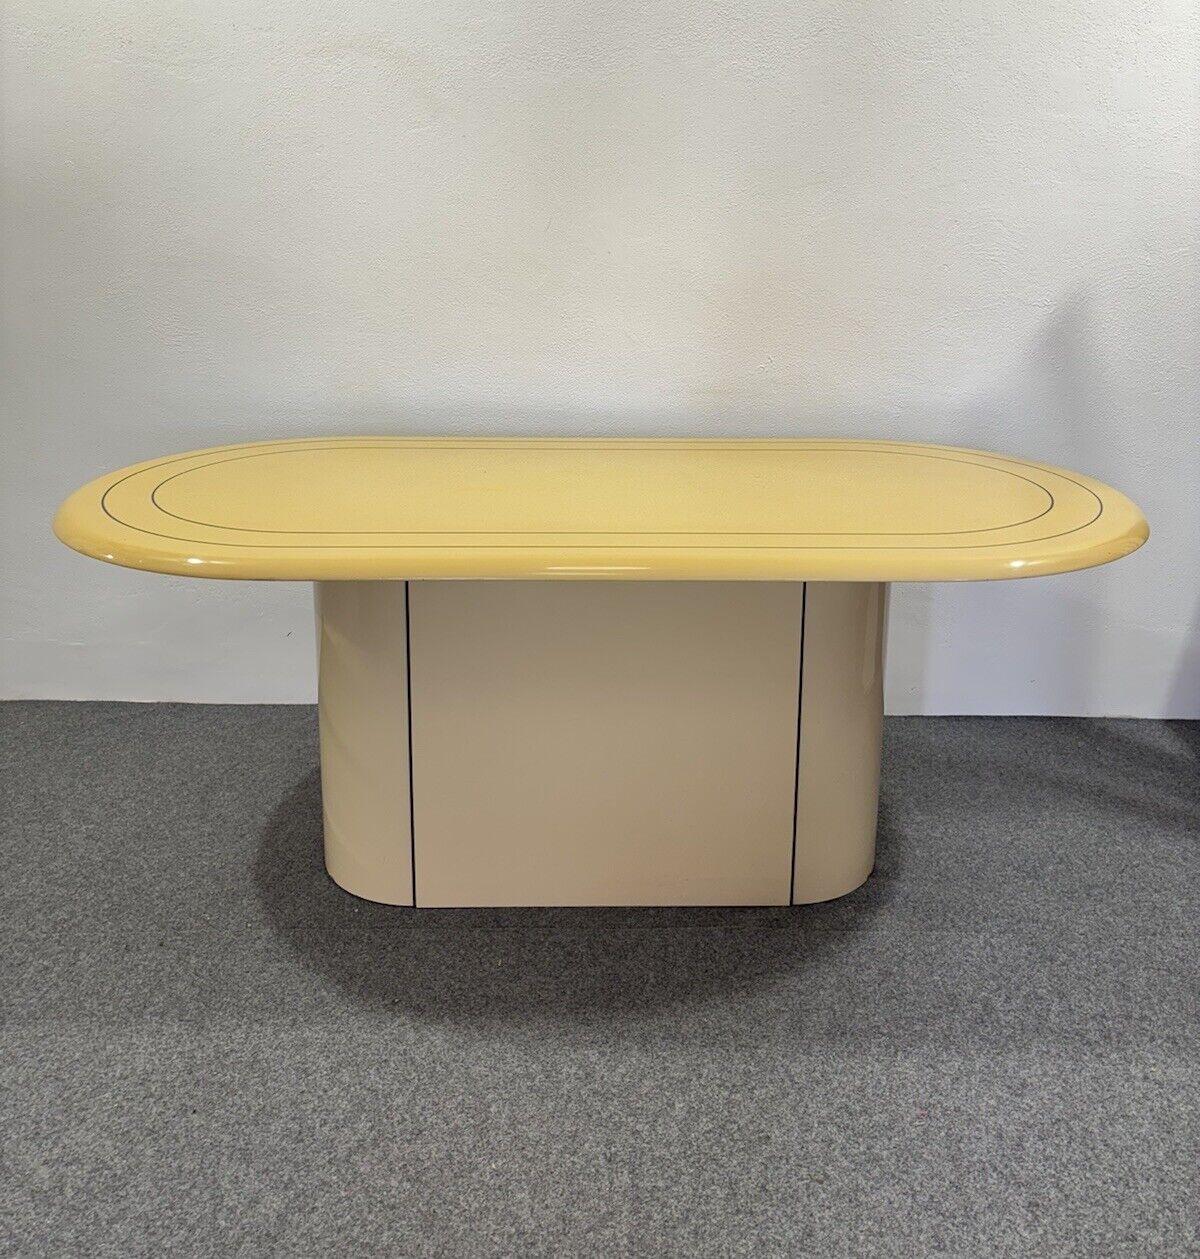 Pierre Cardin Style Dining Table Wooden Modern Design 1970s For Sale 4